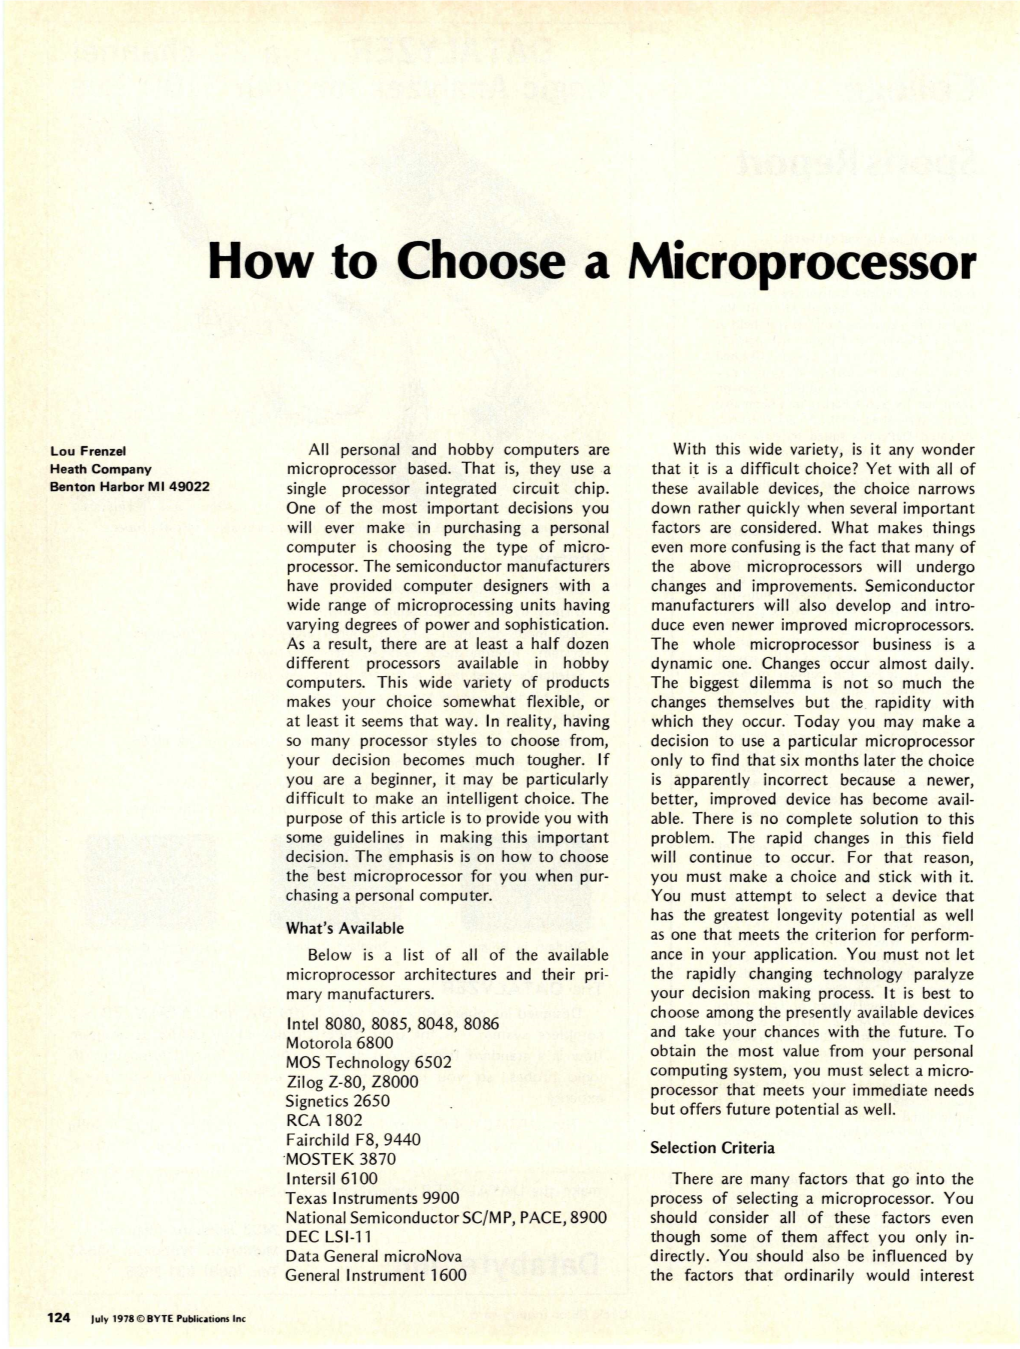 How to Choose a Microprocessor, July 1978, BYTE Magazine